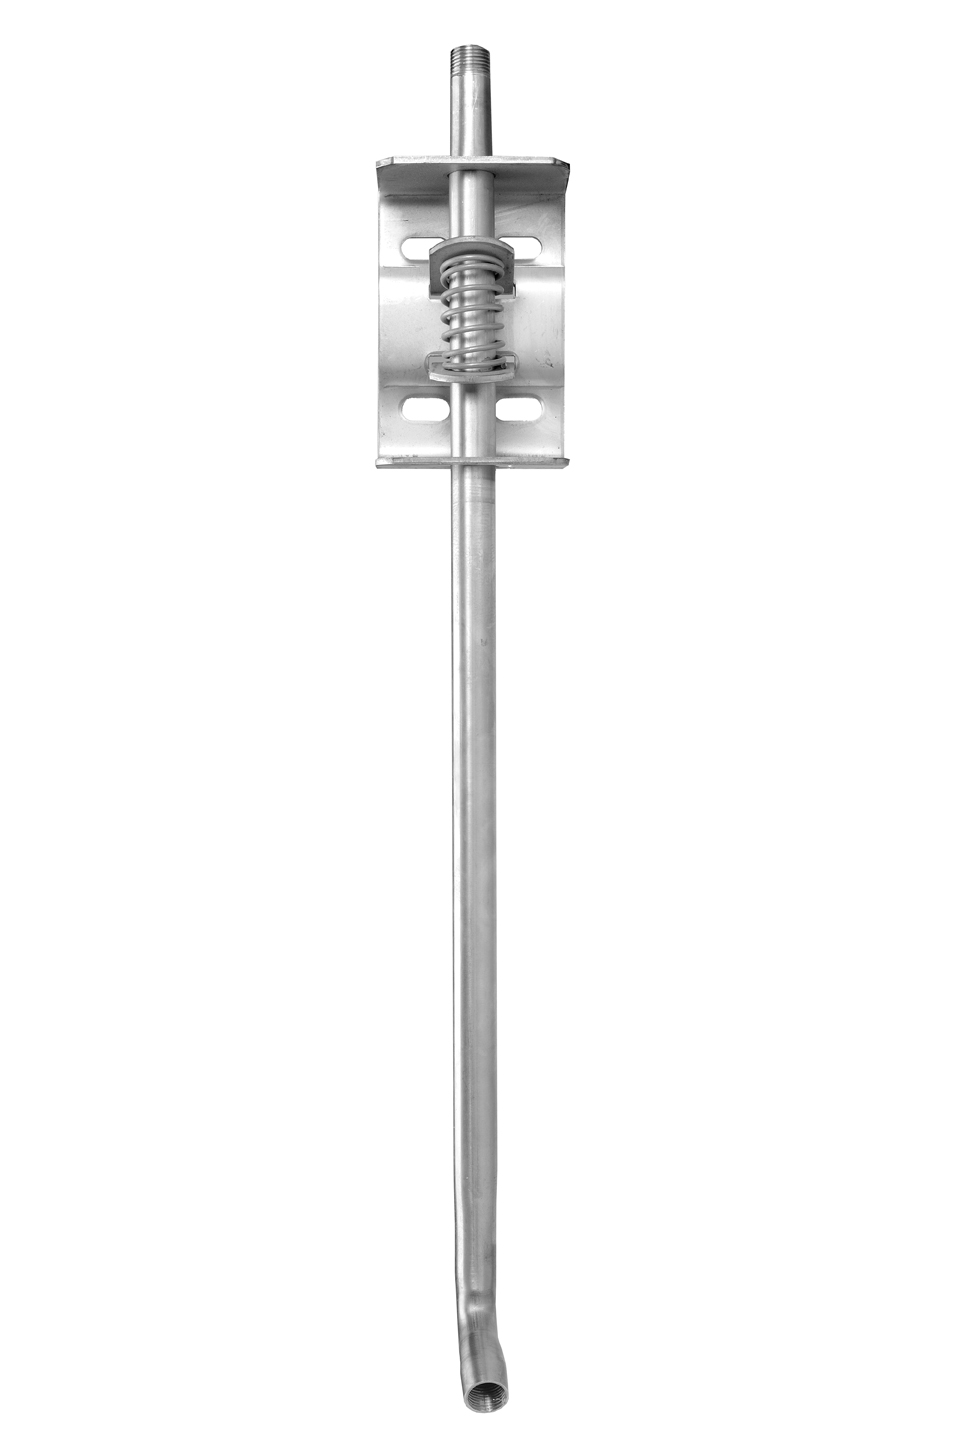 Stainless steel height-adjuster – code 130